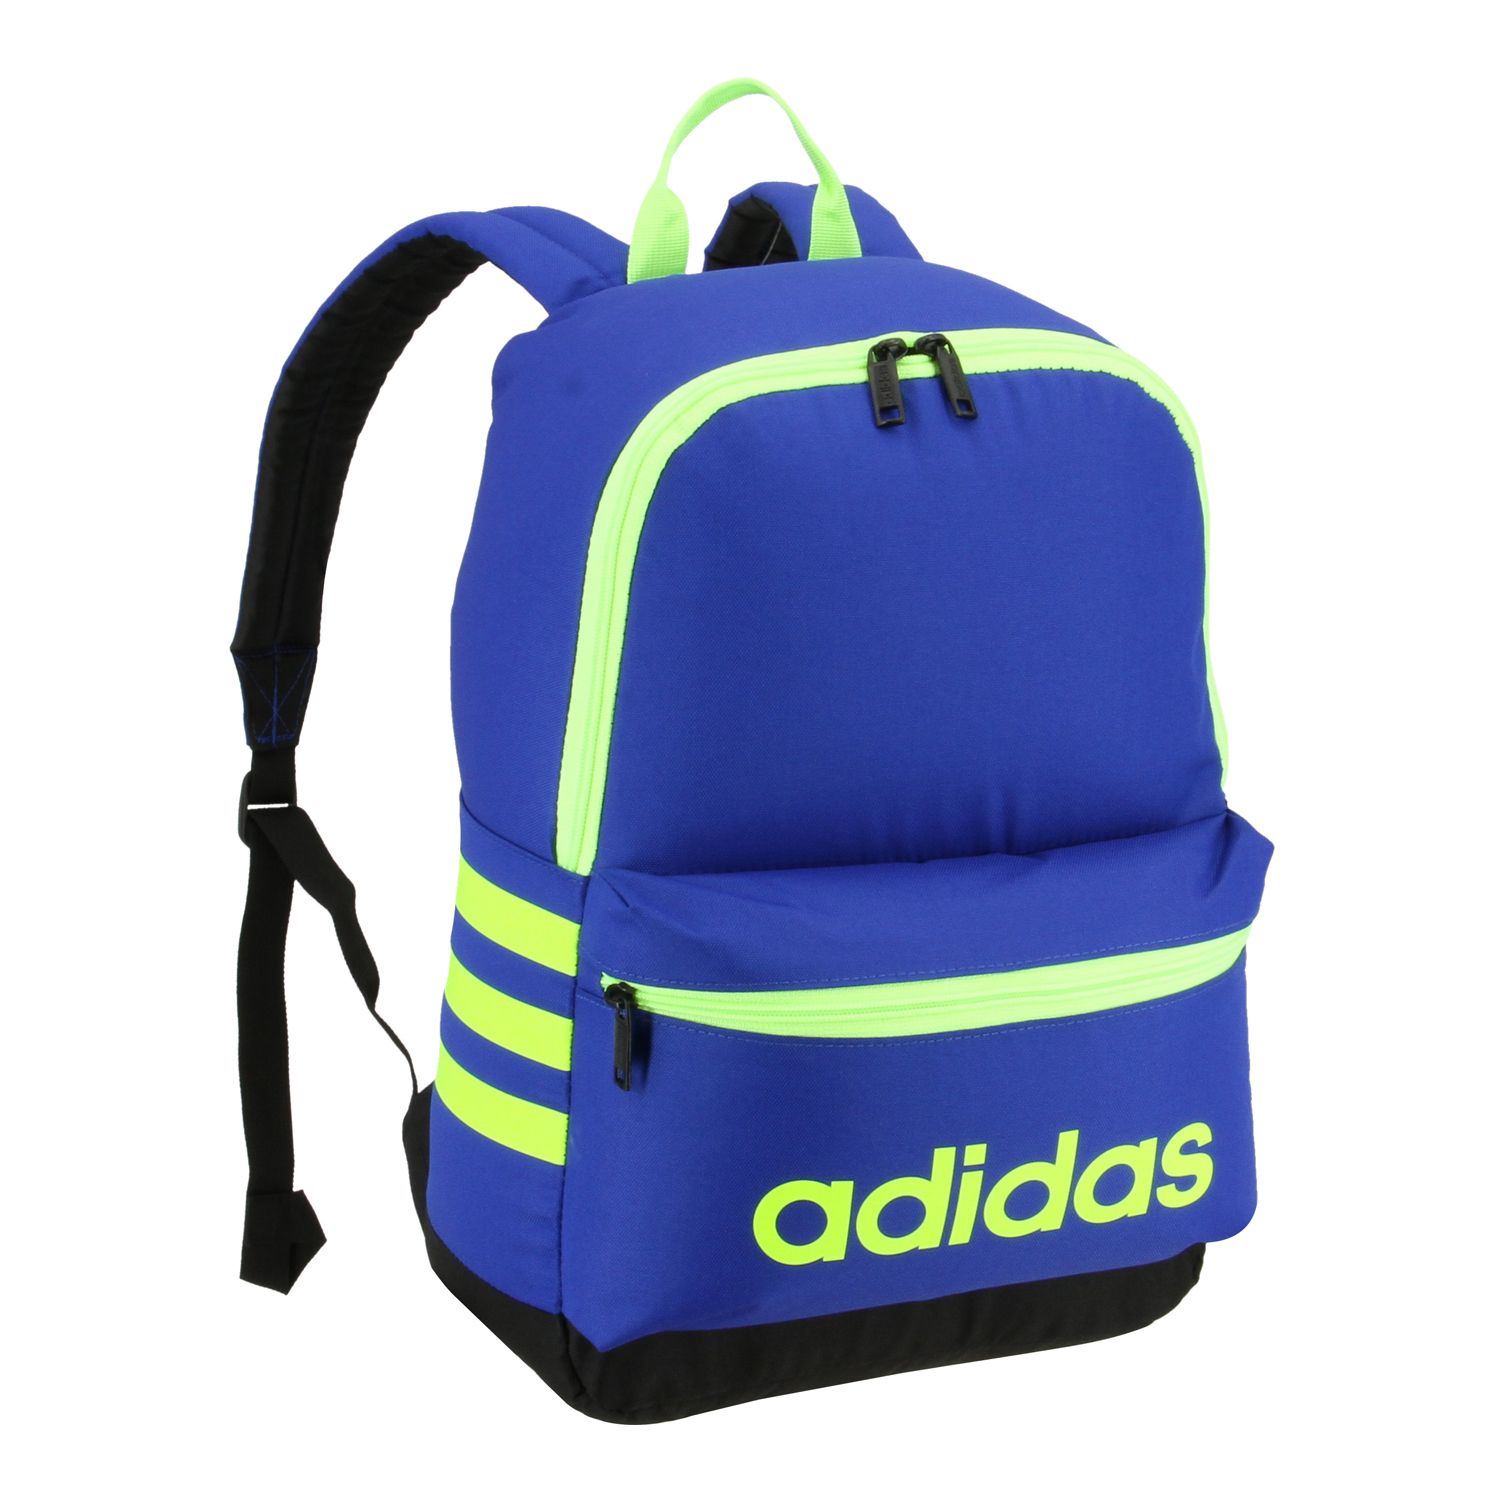 adidas youth classic 3s backpack